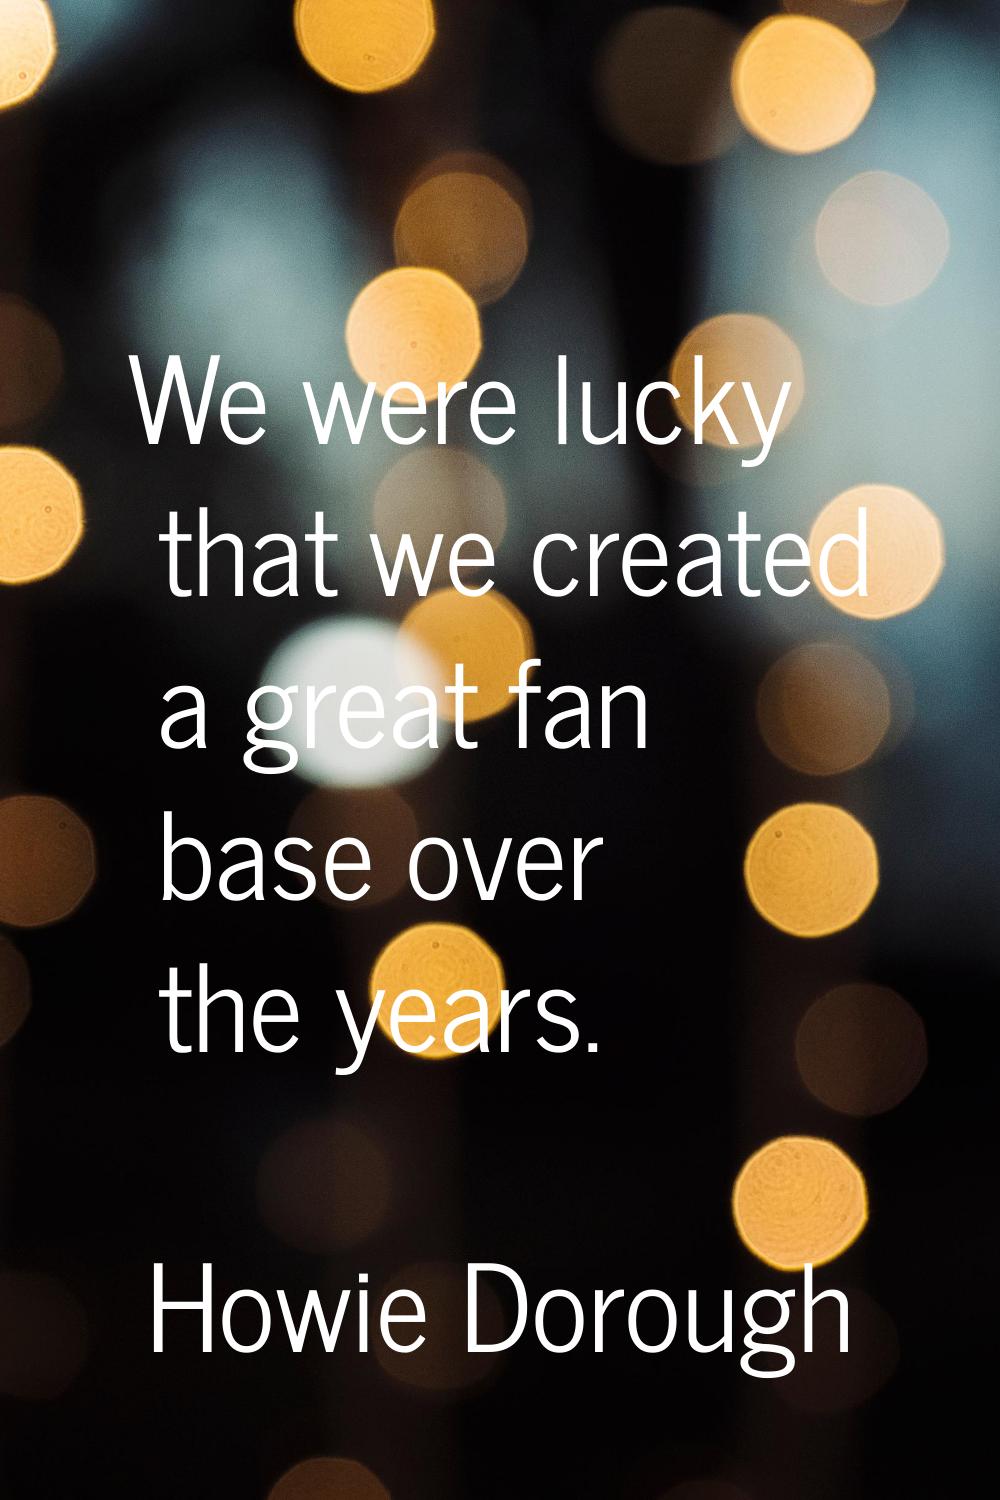 We were lucky that we created a great fan base over the years.